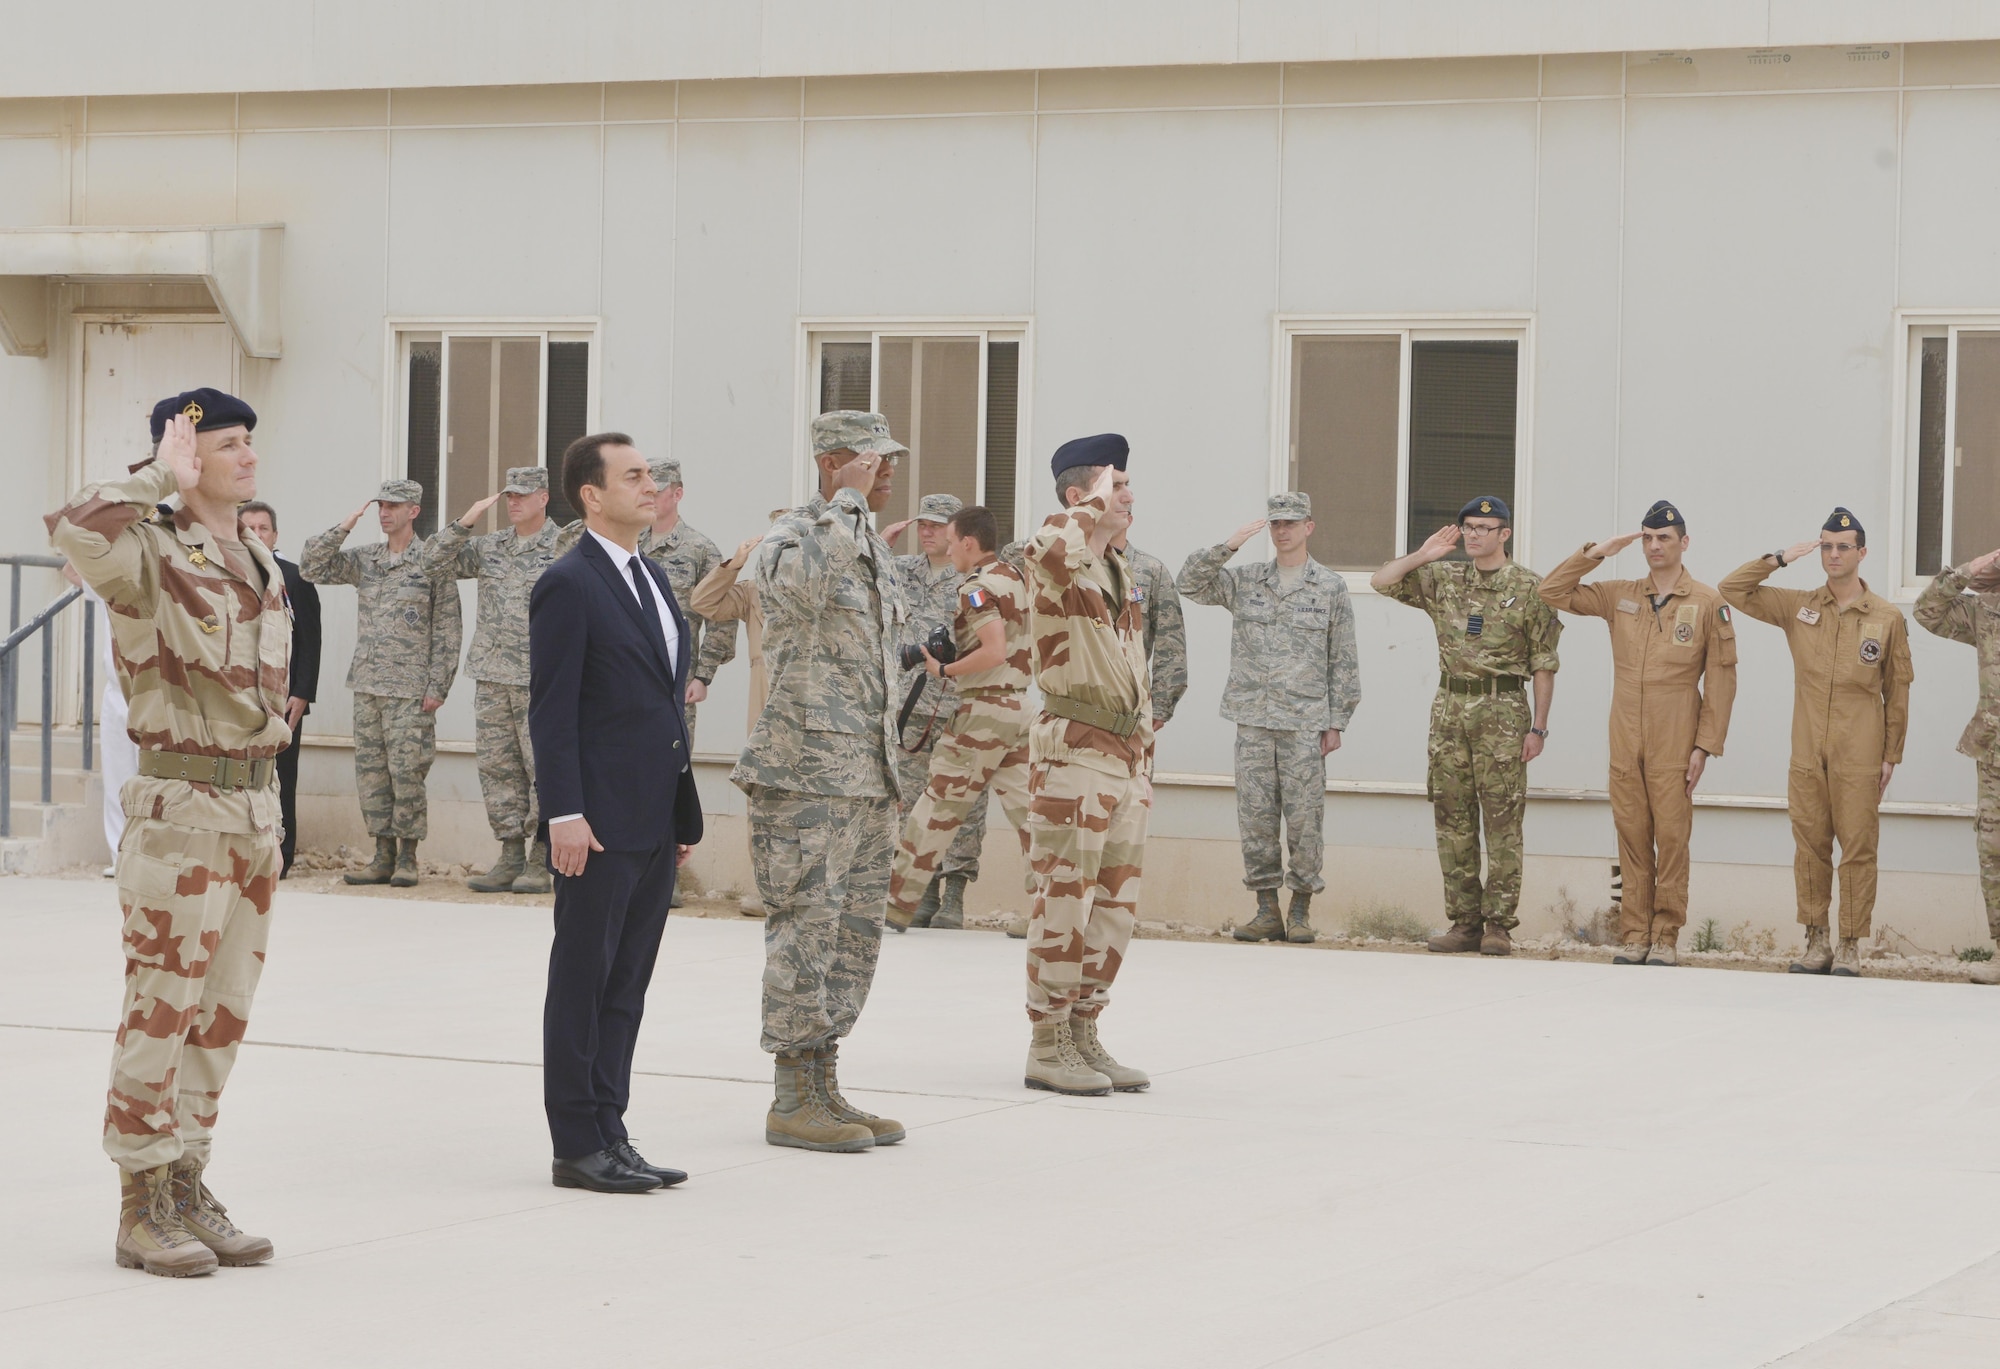 Distinguished visitors render a salute during the playing of the French national anthem during the Bastille Day ceremony July 14, 2015 at Al Udeid Air Base, Qatar. The French celebrate July 14th As Bastille Day to commemorate the storming of Bastille at the beginning of the French revolution in 1789. (U.S. Air Force photo/Staff Sgt. Alexandre Montes)